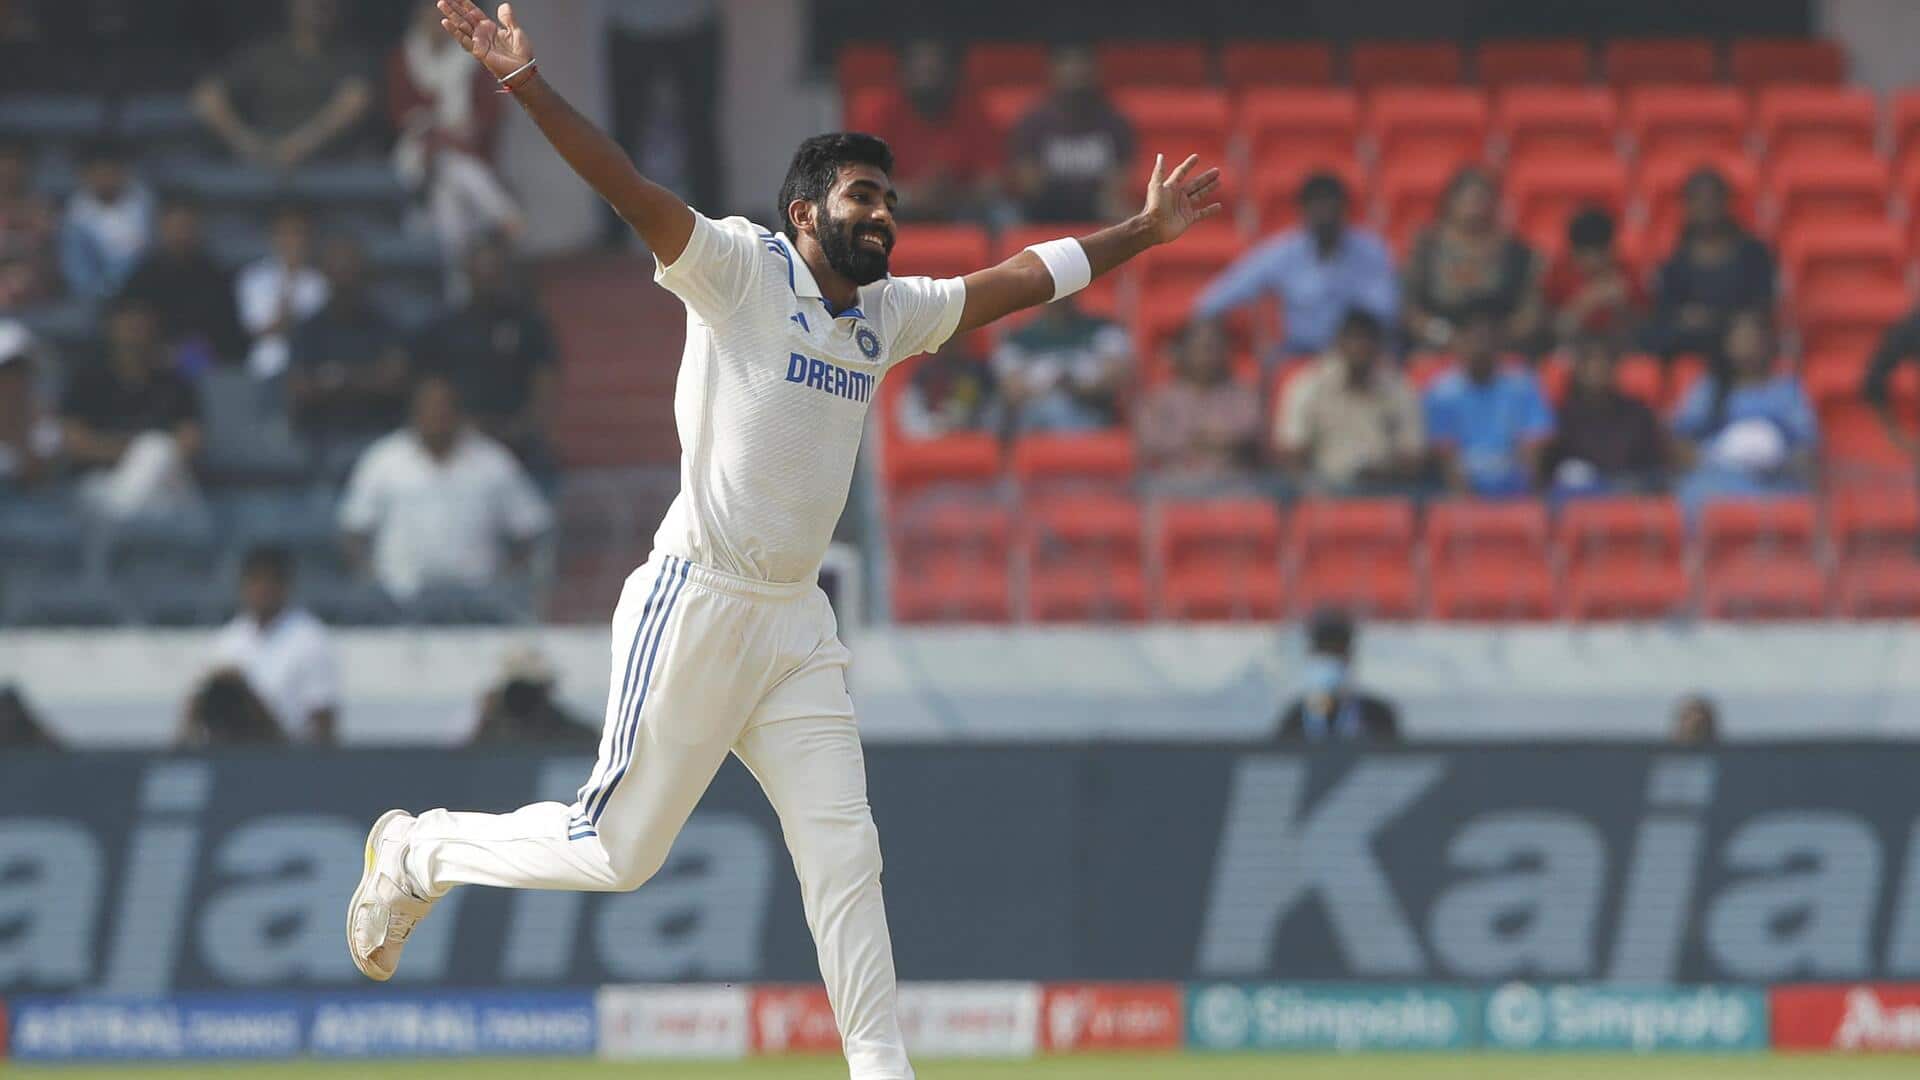 Jasprit Bumrah becomes fastest Indian pacer to 150 Test wickets